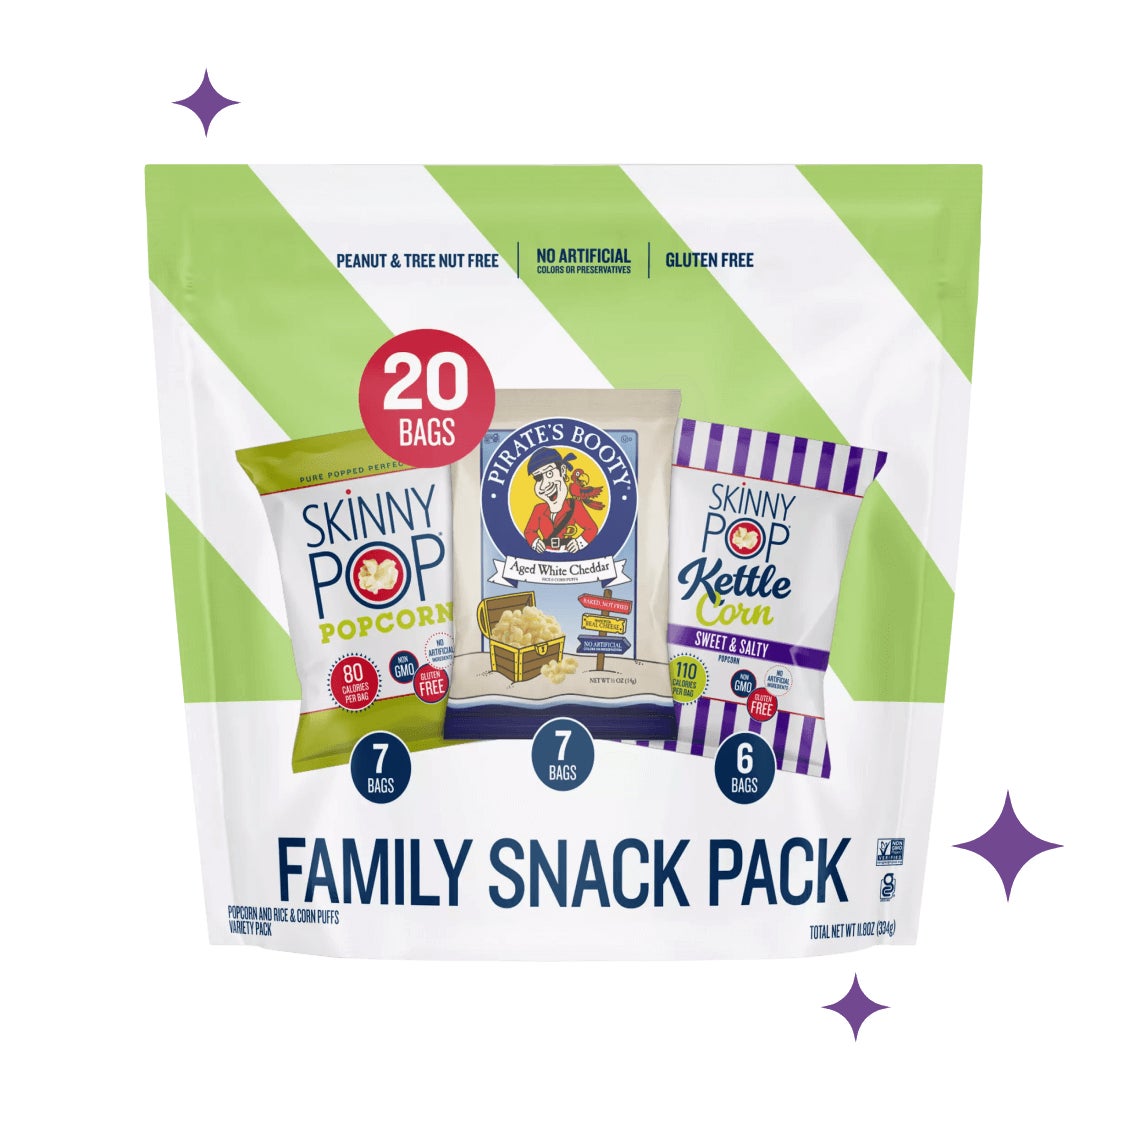 family snack pack of pirates booty and skinnypop popcorn